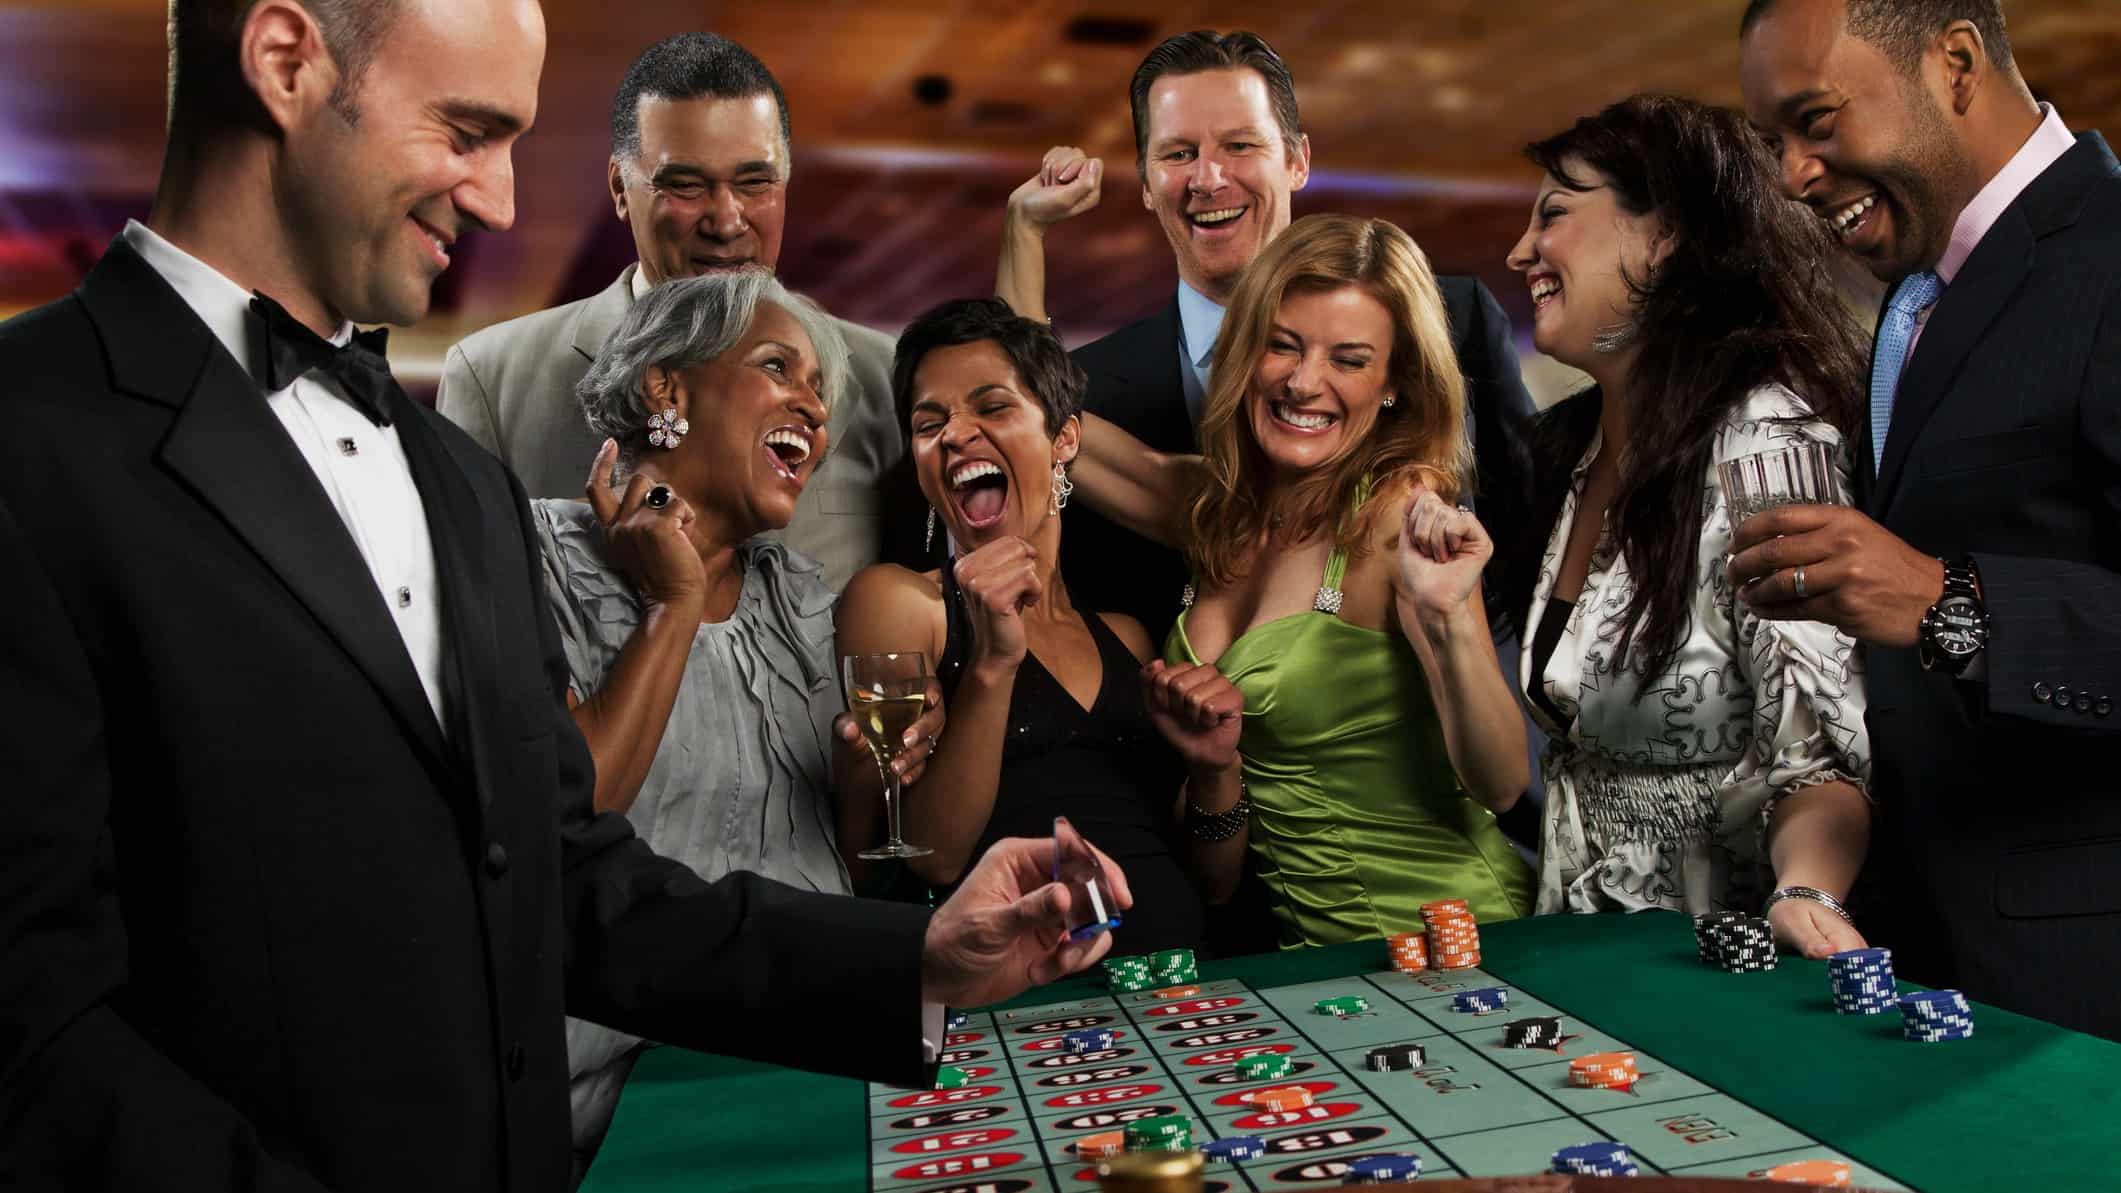 A group of people cheer at a blackjack table in a casino